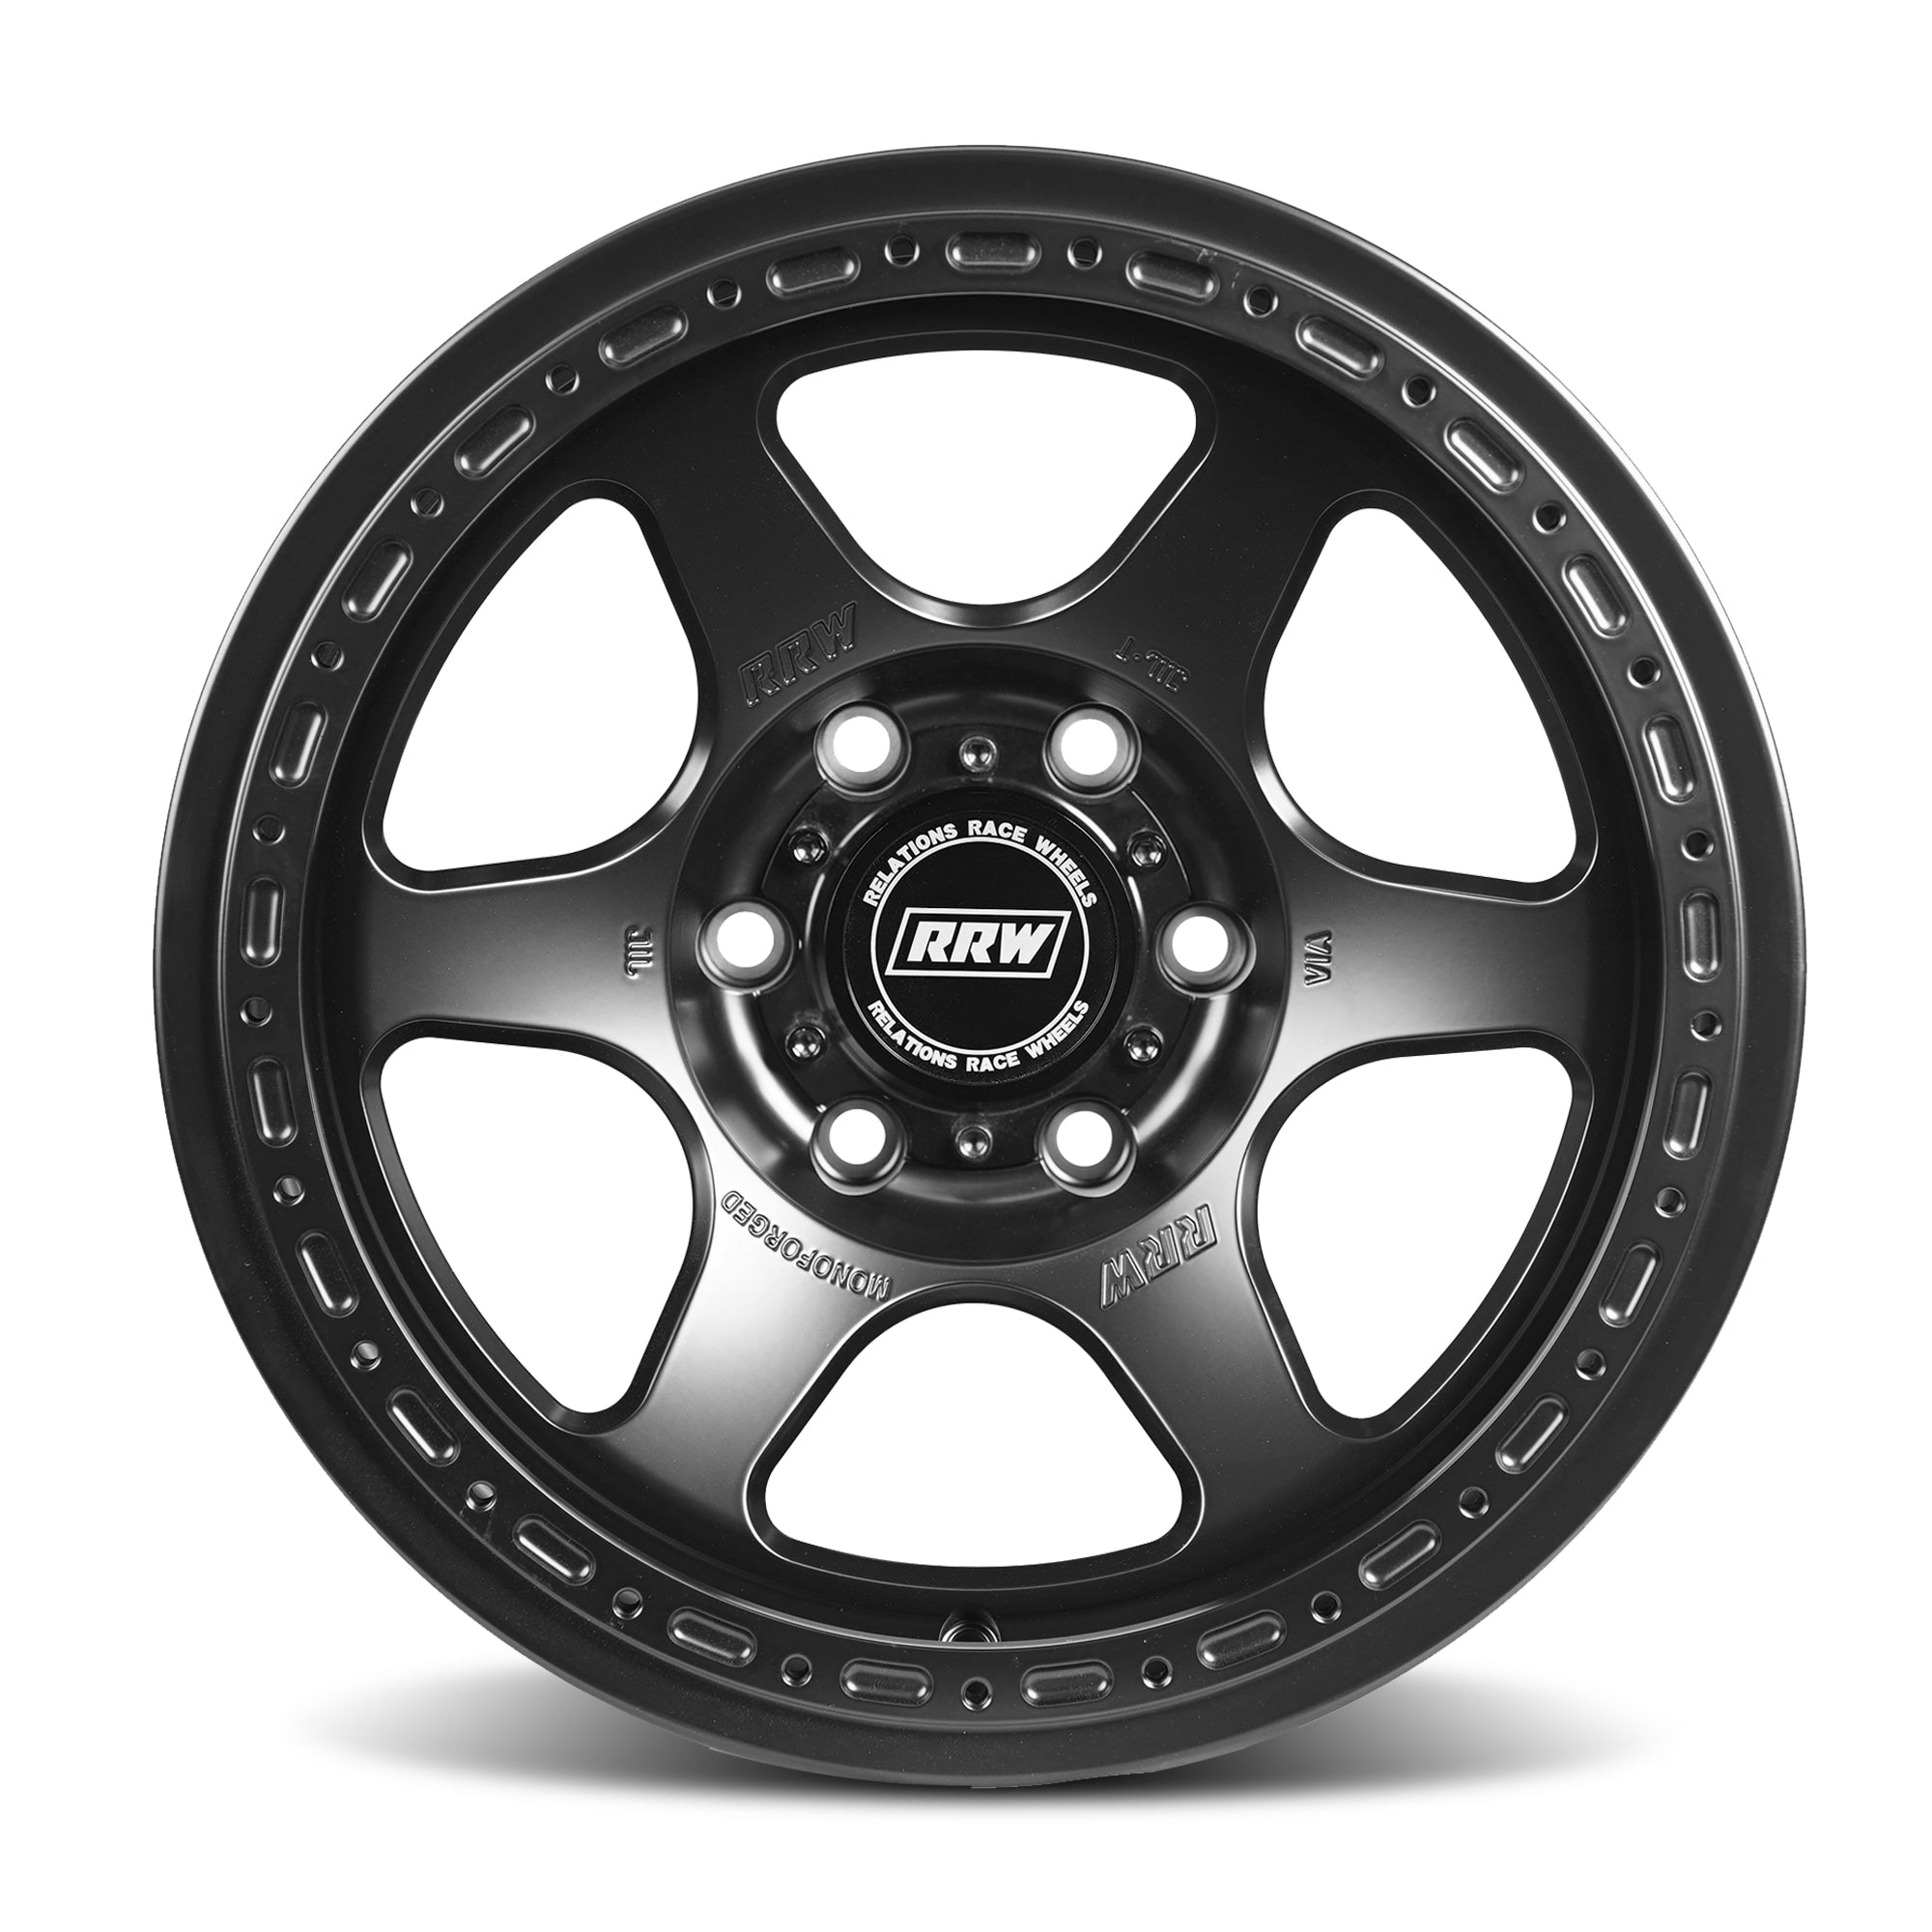 Pre-Order: RS2-H Hybrid 17x8.5 and 18x8.5 MonoForged Wheel